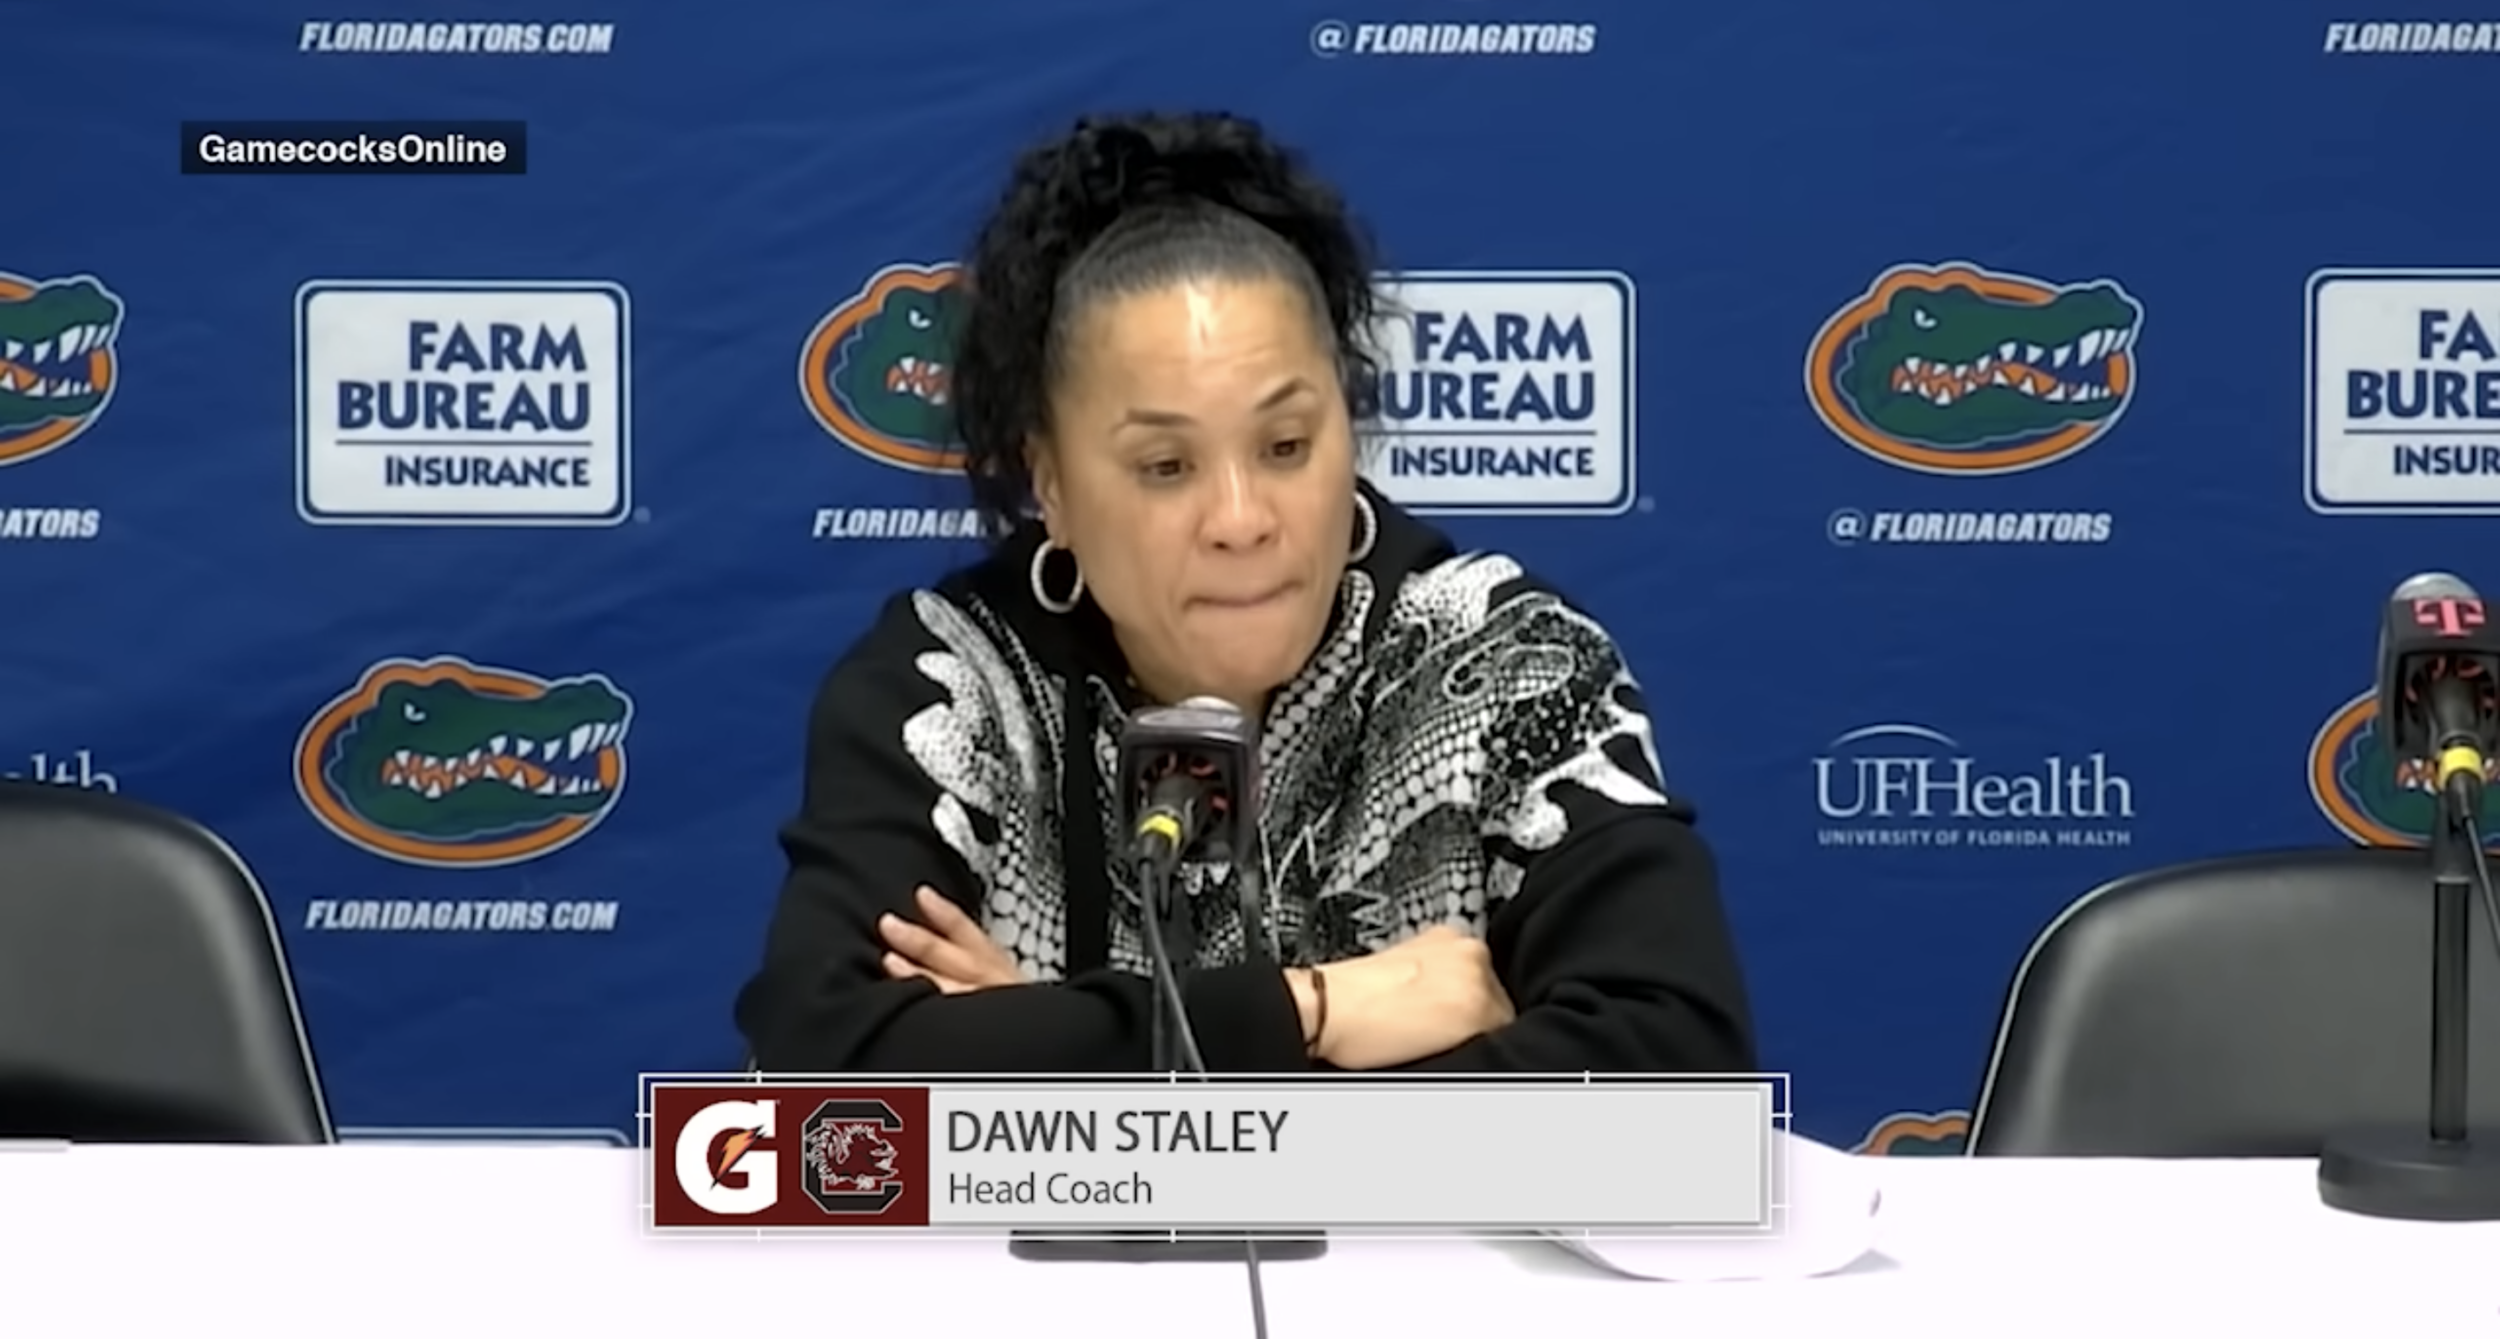 WBB PostGame News Conference: Dawn Staley - (Florida)